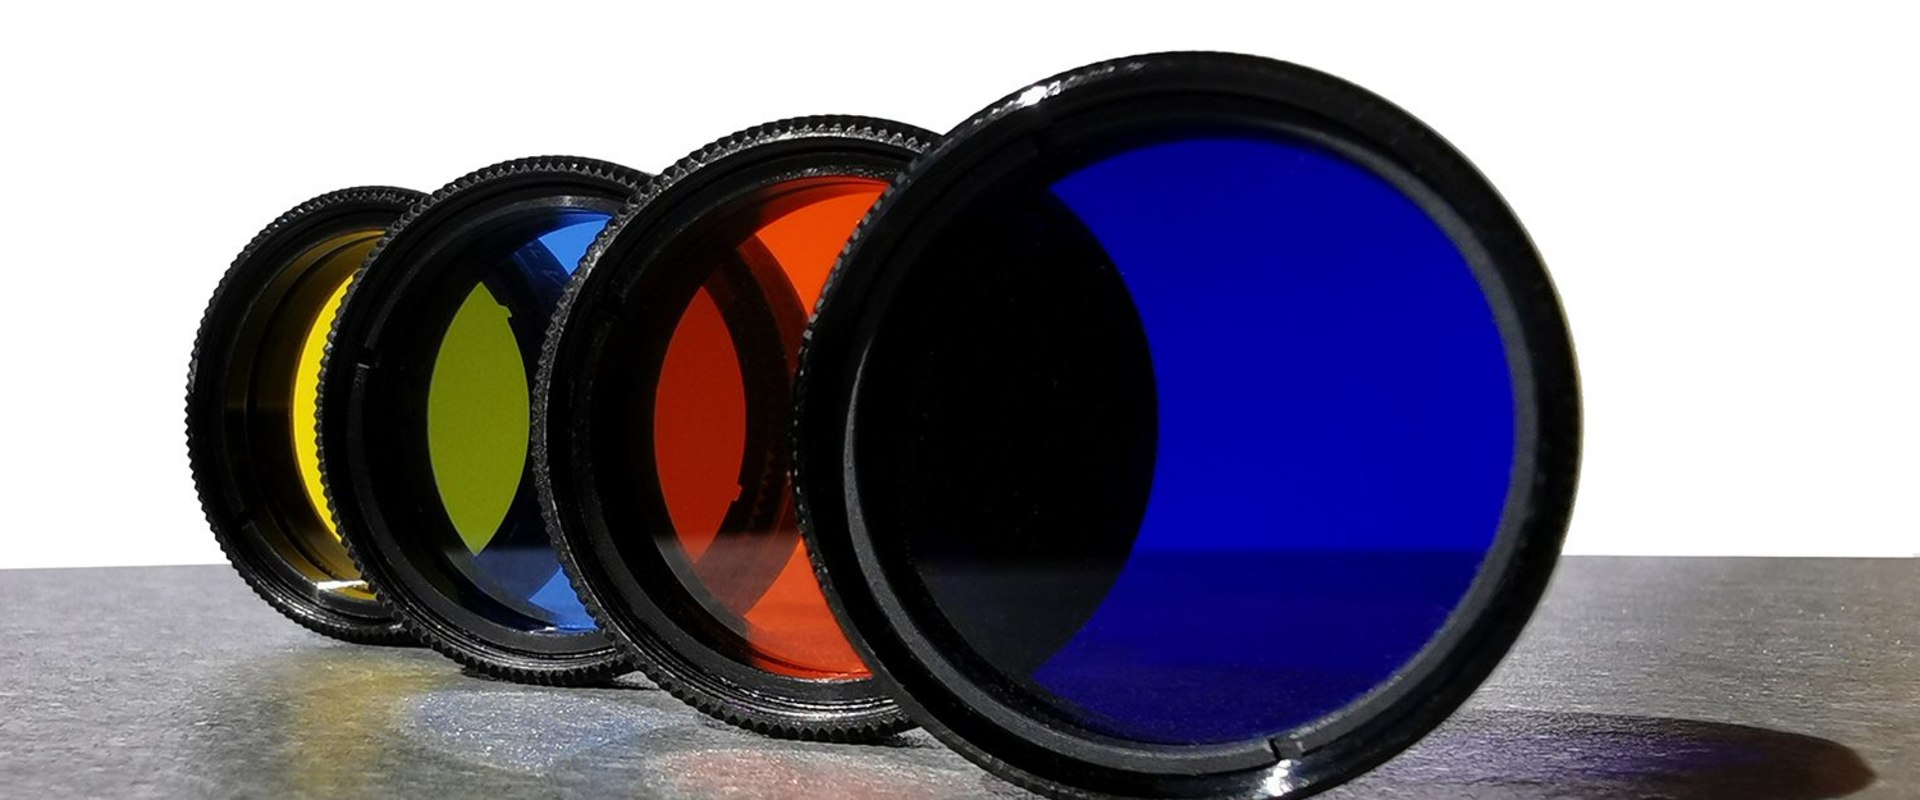 Colored Filters: What They Are and How They Work